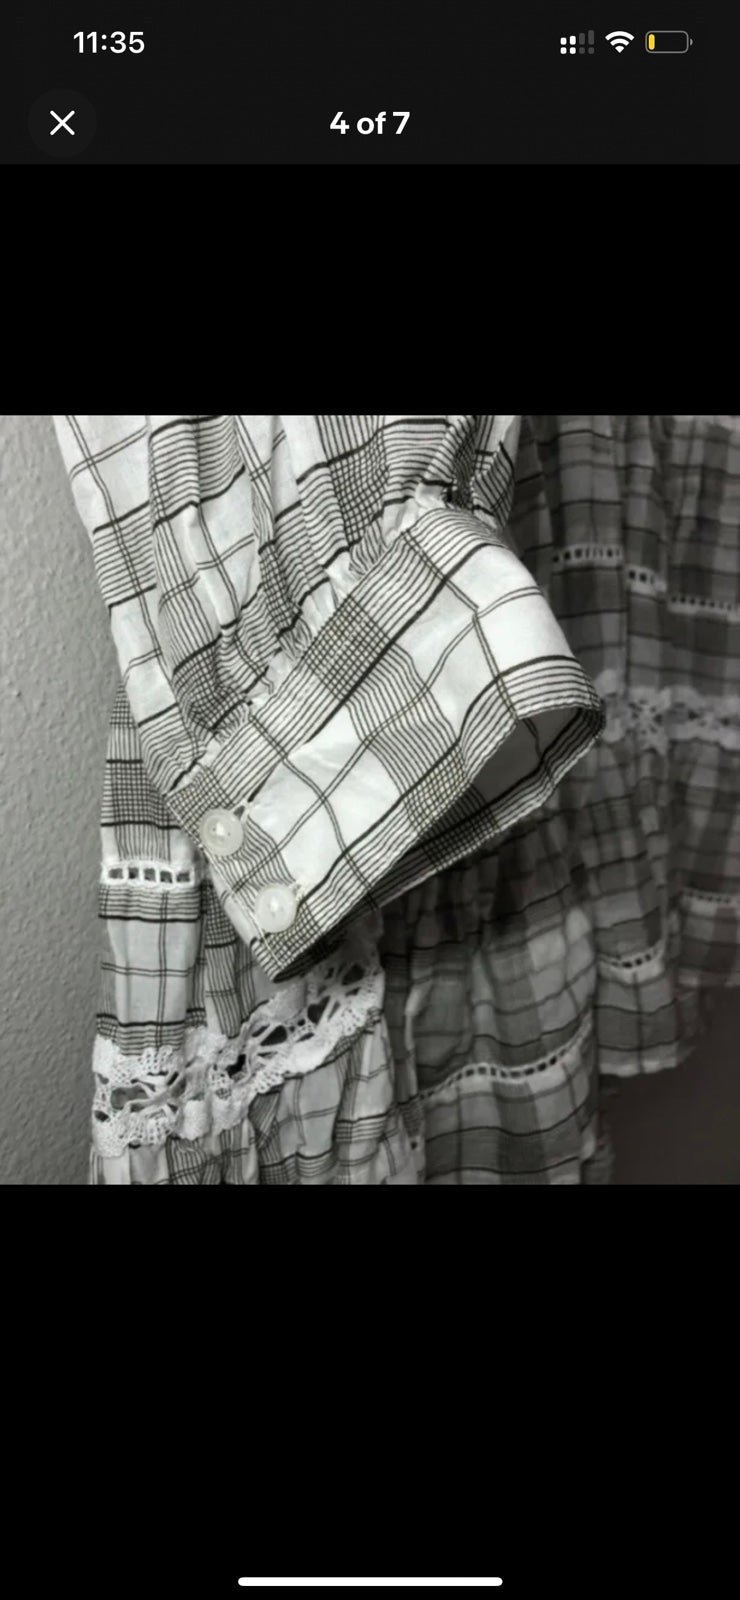 Simple Free People Time Out Plaid Lace Babydoll Tunic Tiered Ivory Plaid Cotton HYkaNsEQr US Outlet